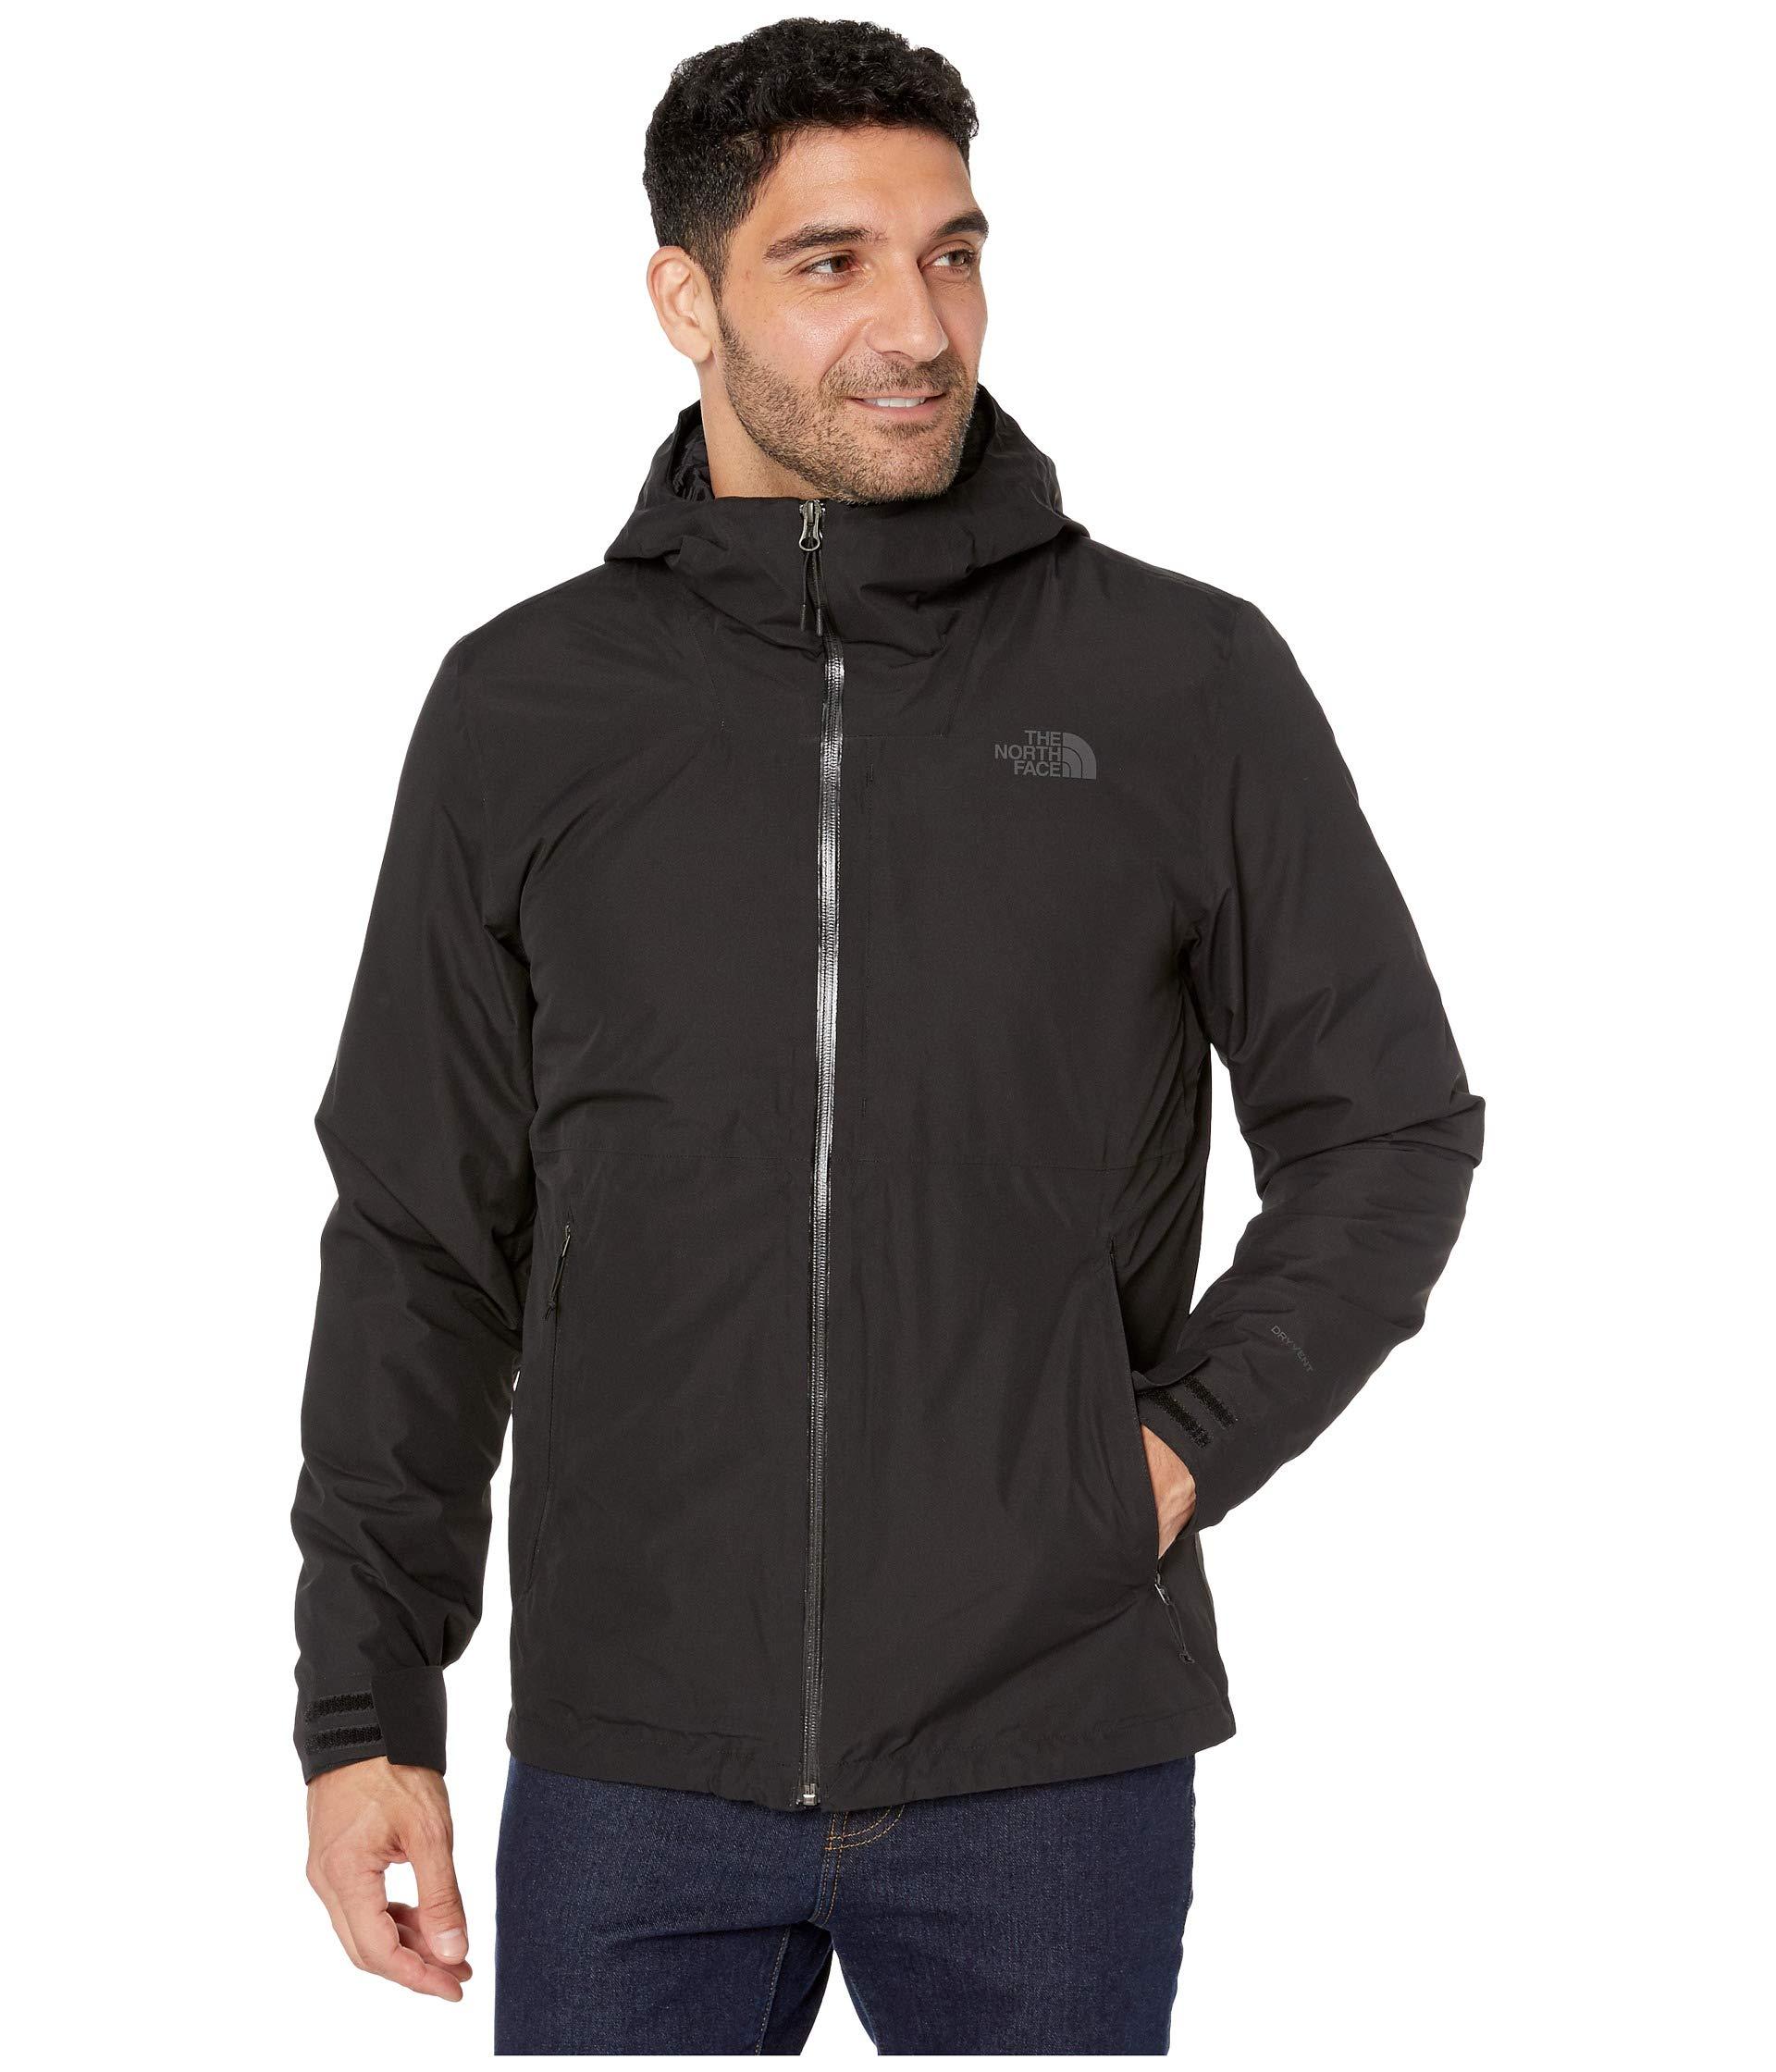 The North Face Fleece Inlux Insulated Jacket in Black for Men - Lyst